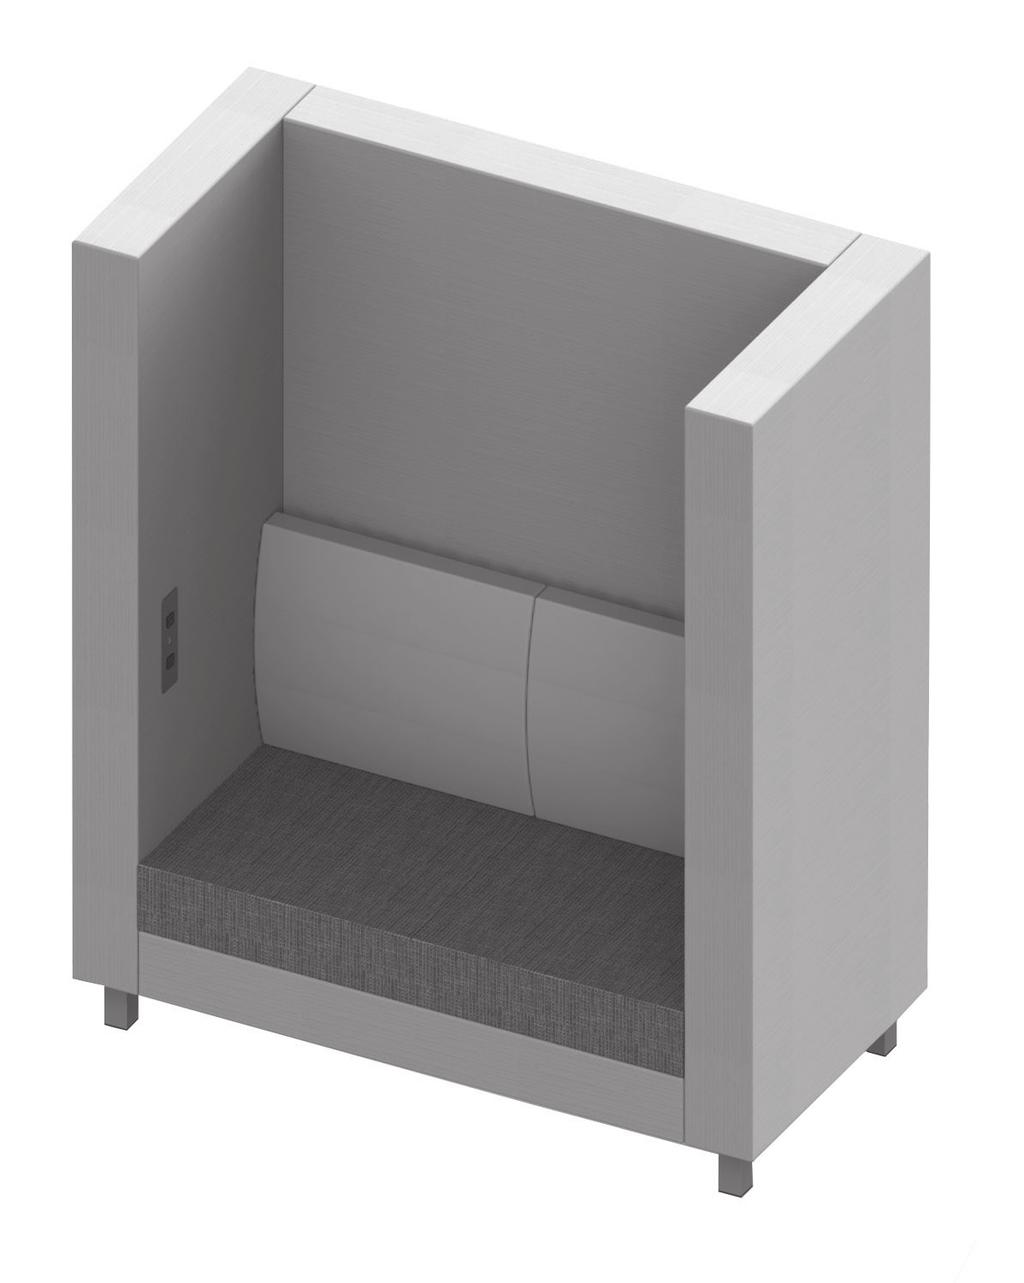 PRIVACY POD TYPICAL Shown with Optional Power and Data PRIVACY POD WITH 72 HIGH WALLS JX83/6072LR JX2424-SEAT/2 64-CSH2418BX/2 48W x 24D Privacy Pod Bench, 72" H Back Wall & L&R Wall 2 Seat Cushions